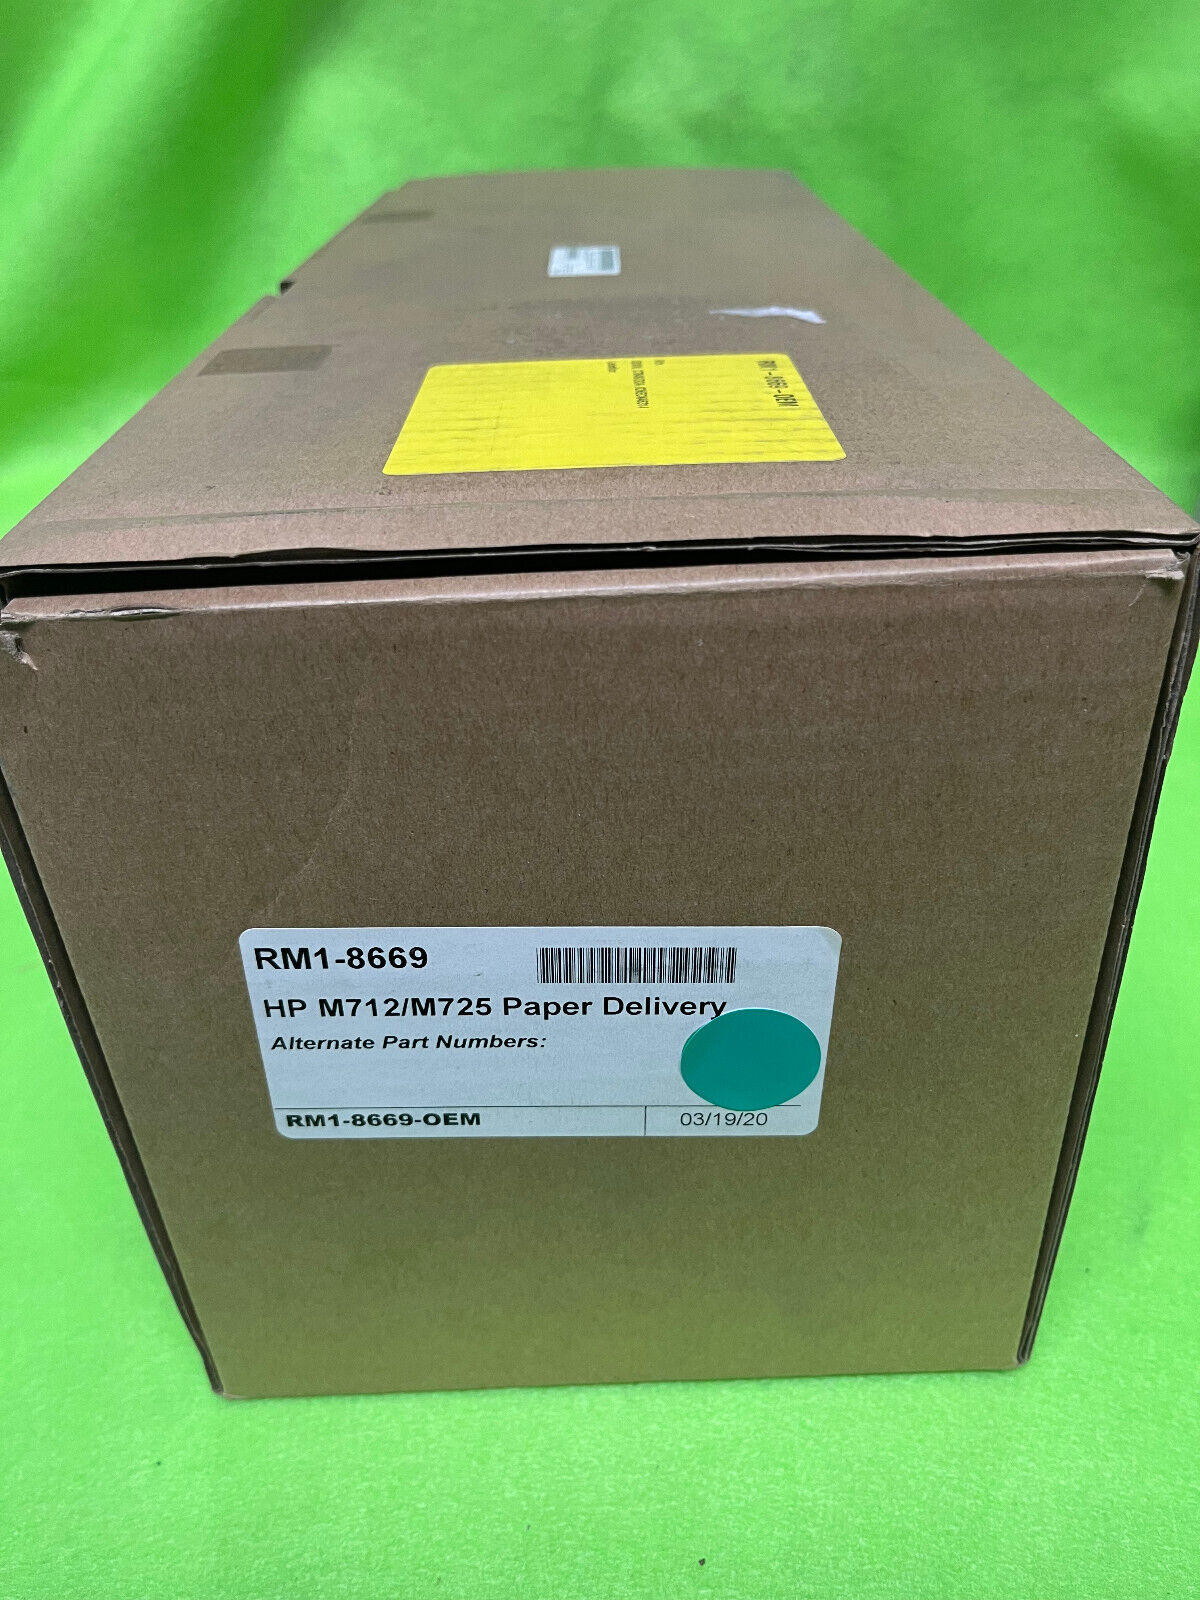 NEW OPEN BOX Genuine HP RM1-8669-OEM (M712/M725) Paper Delivery Assembly